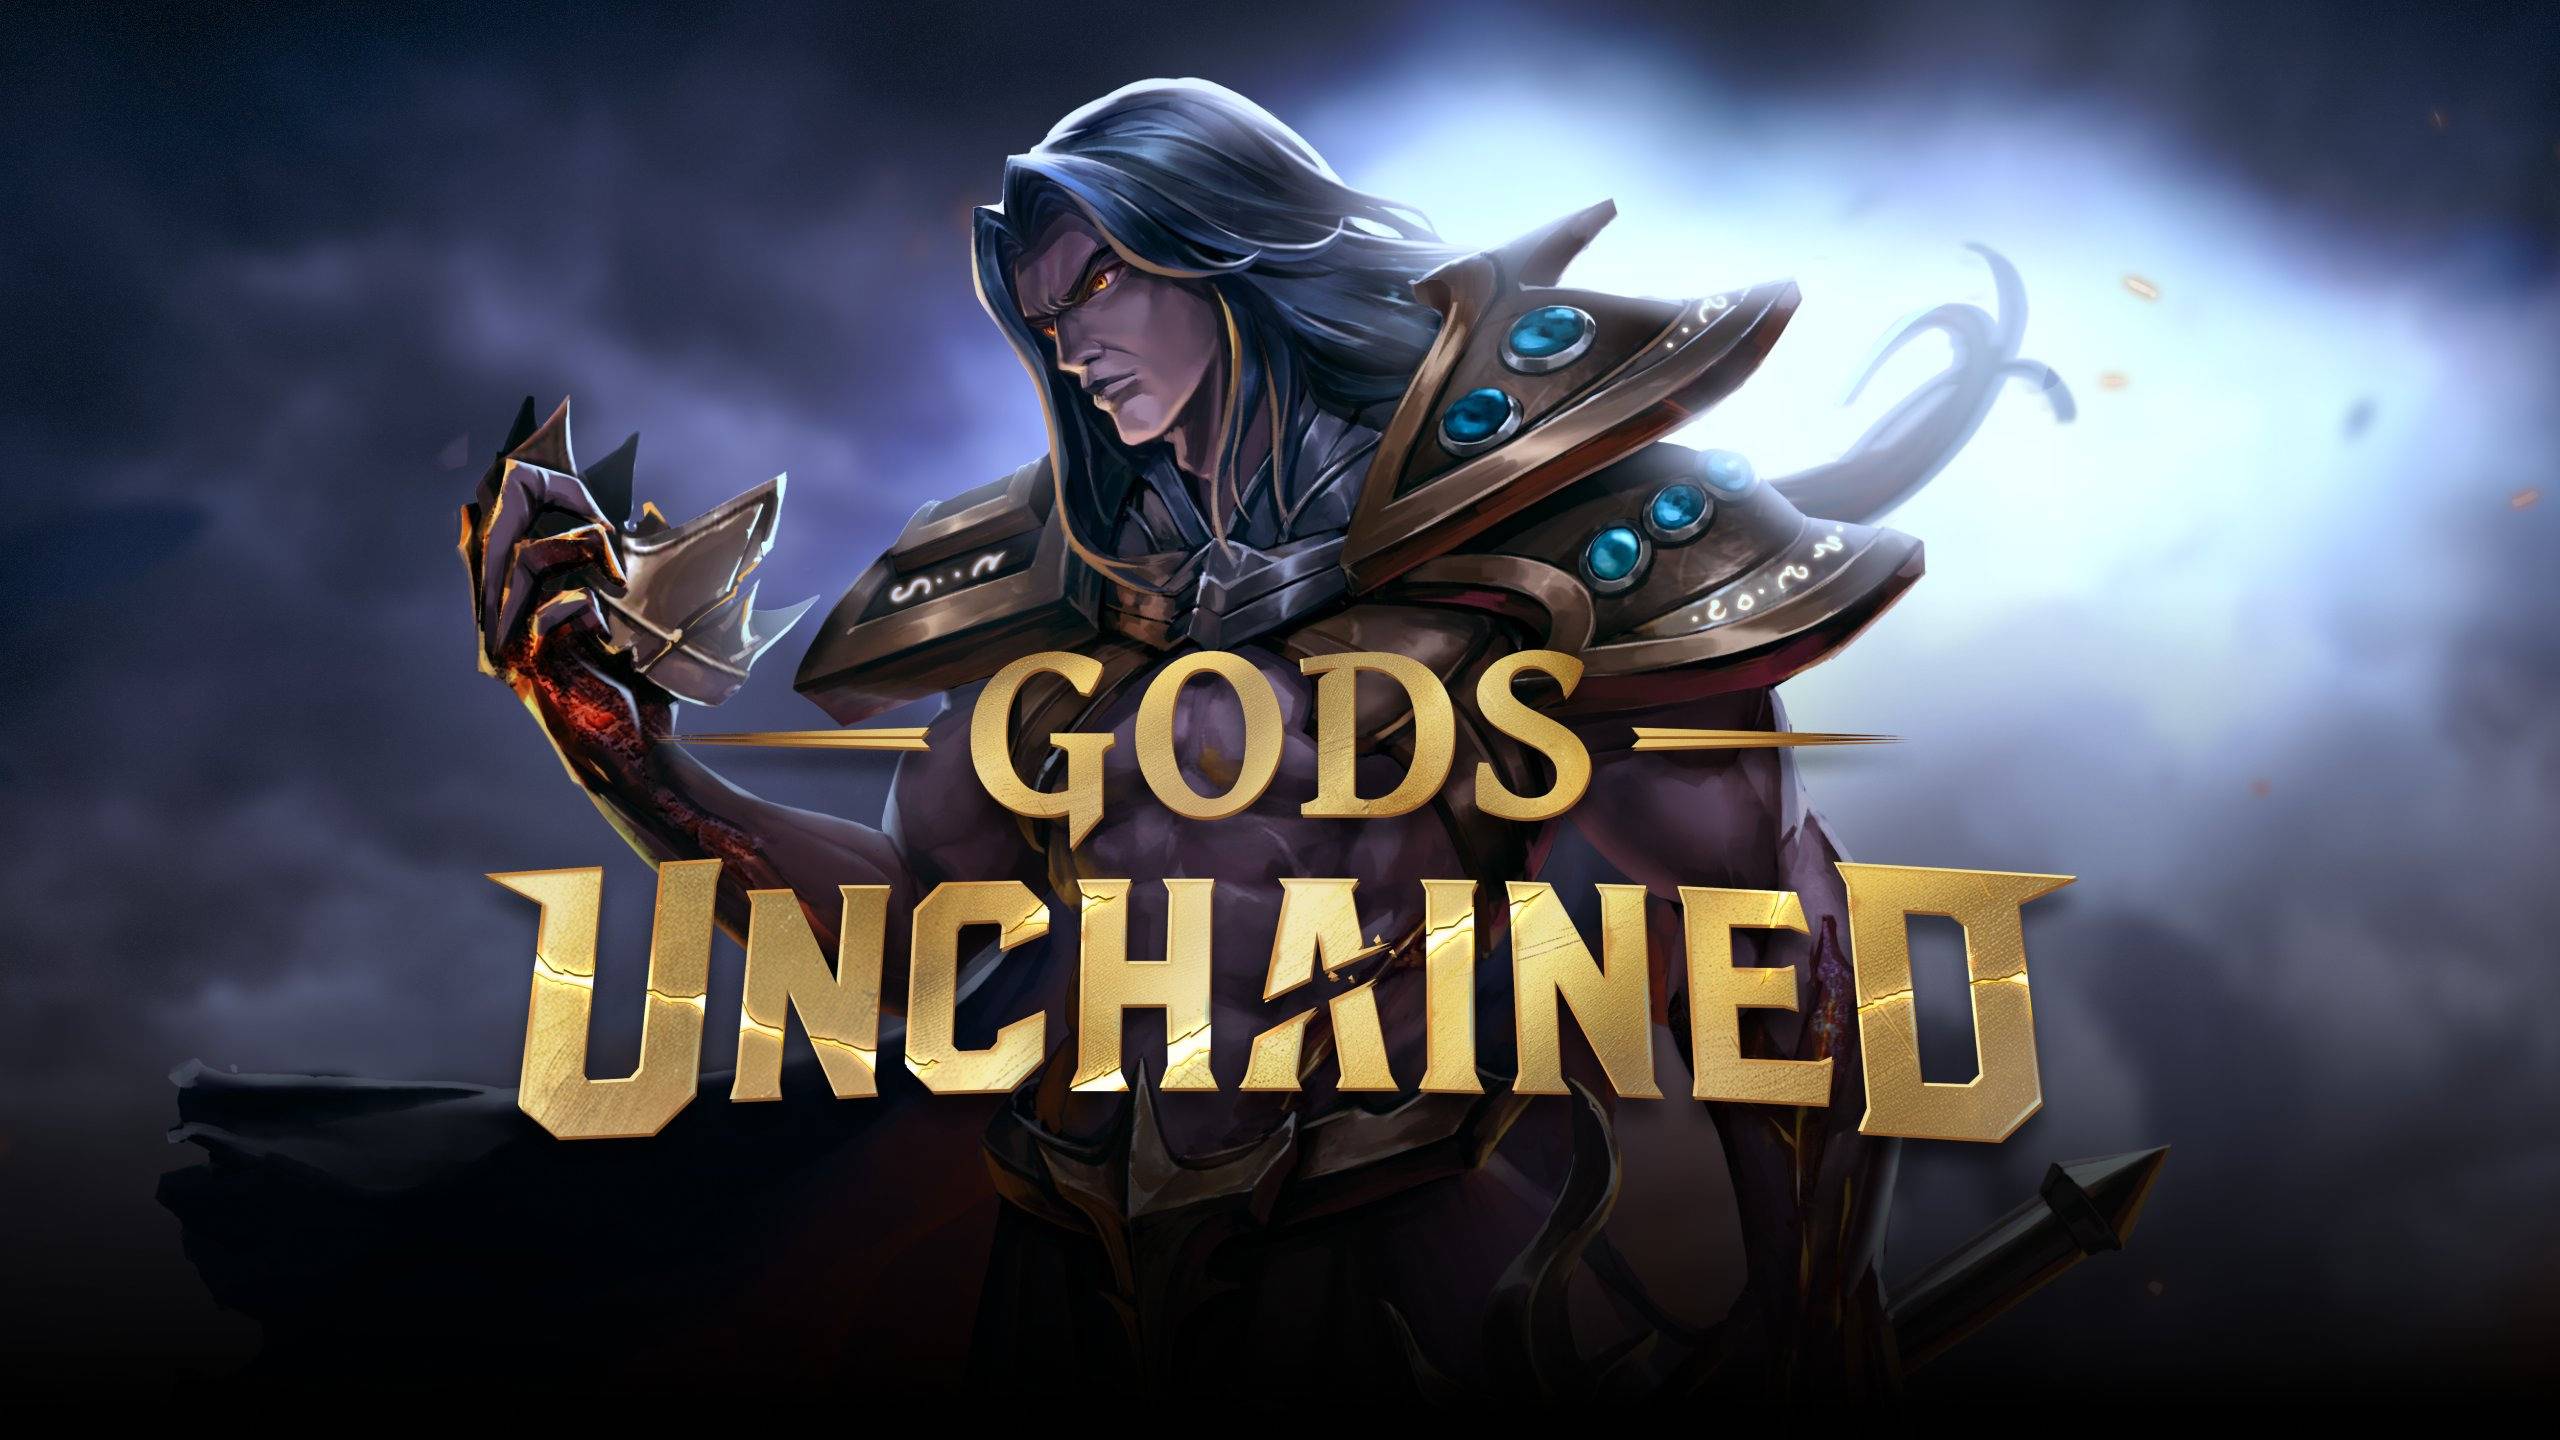 Gods Unchained Secrets: Master This Blockchain Game Now!